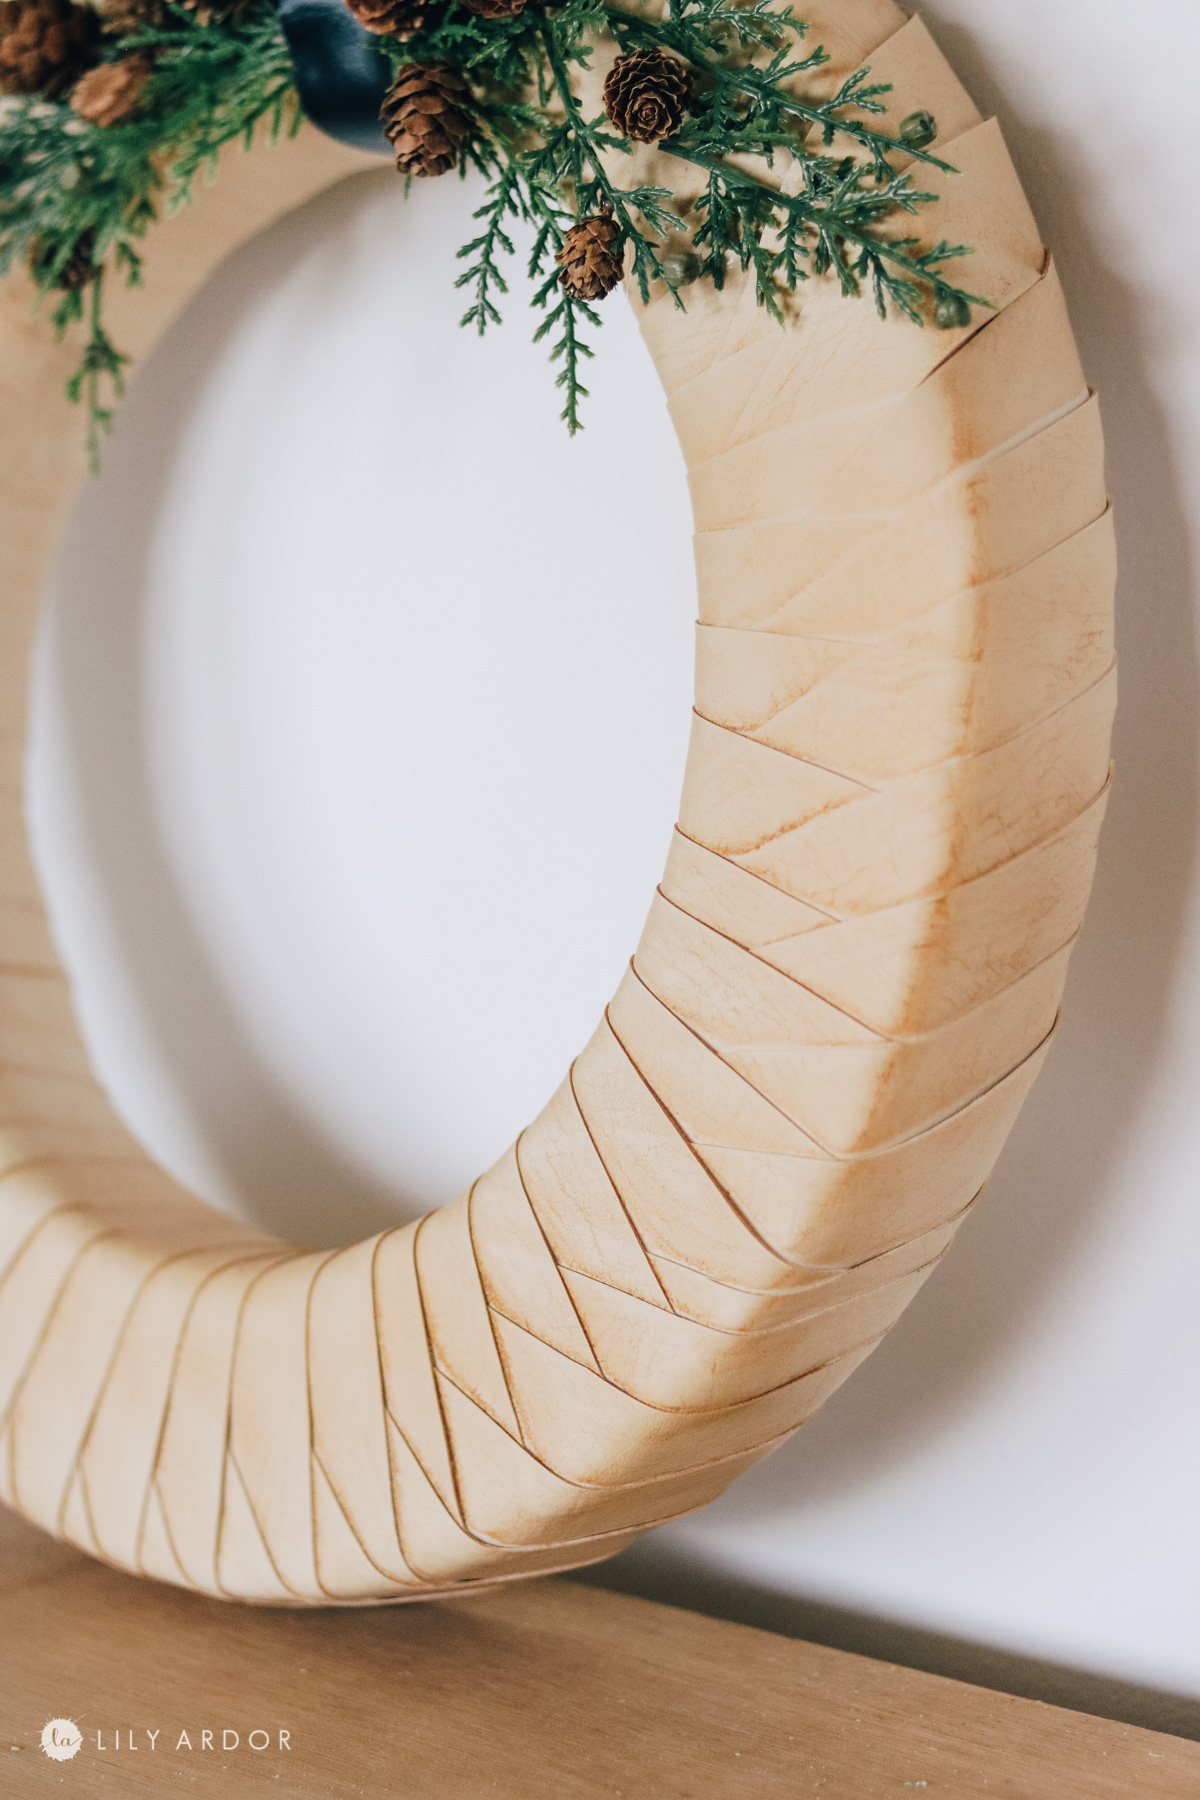 How to make a nordic wreath tutorial